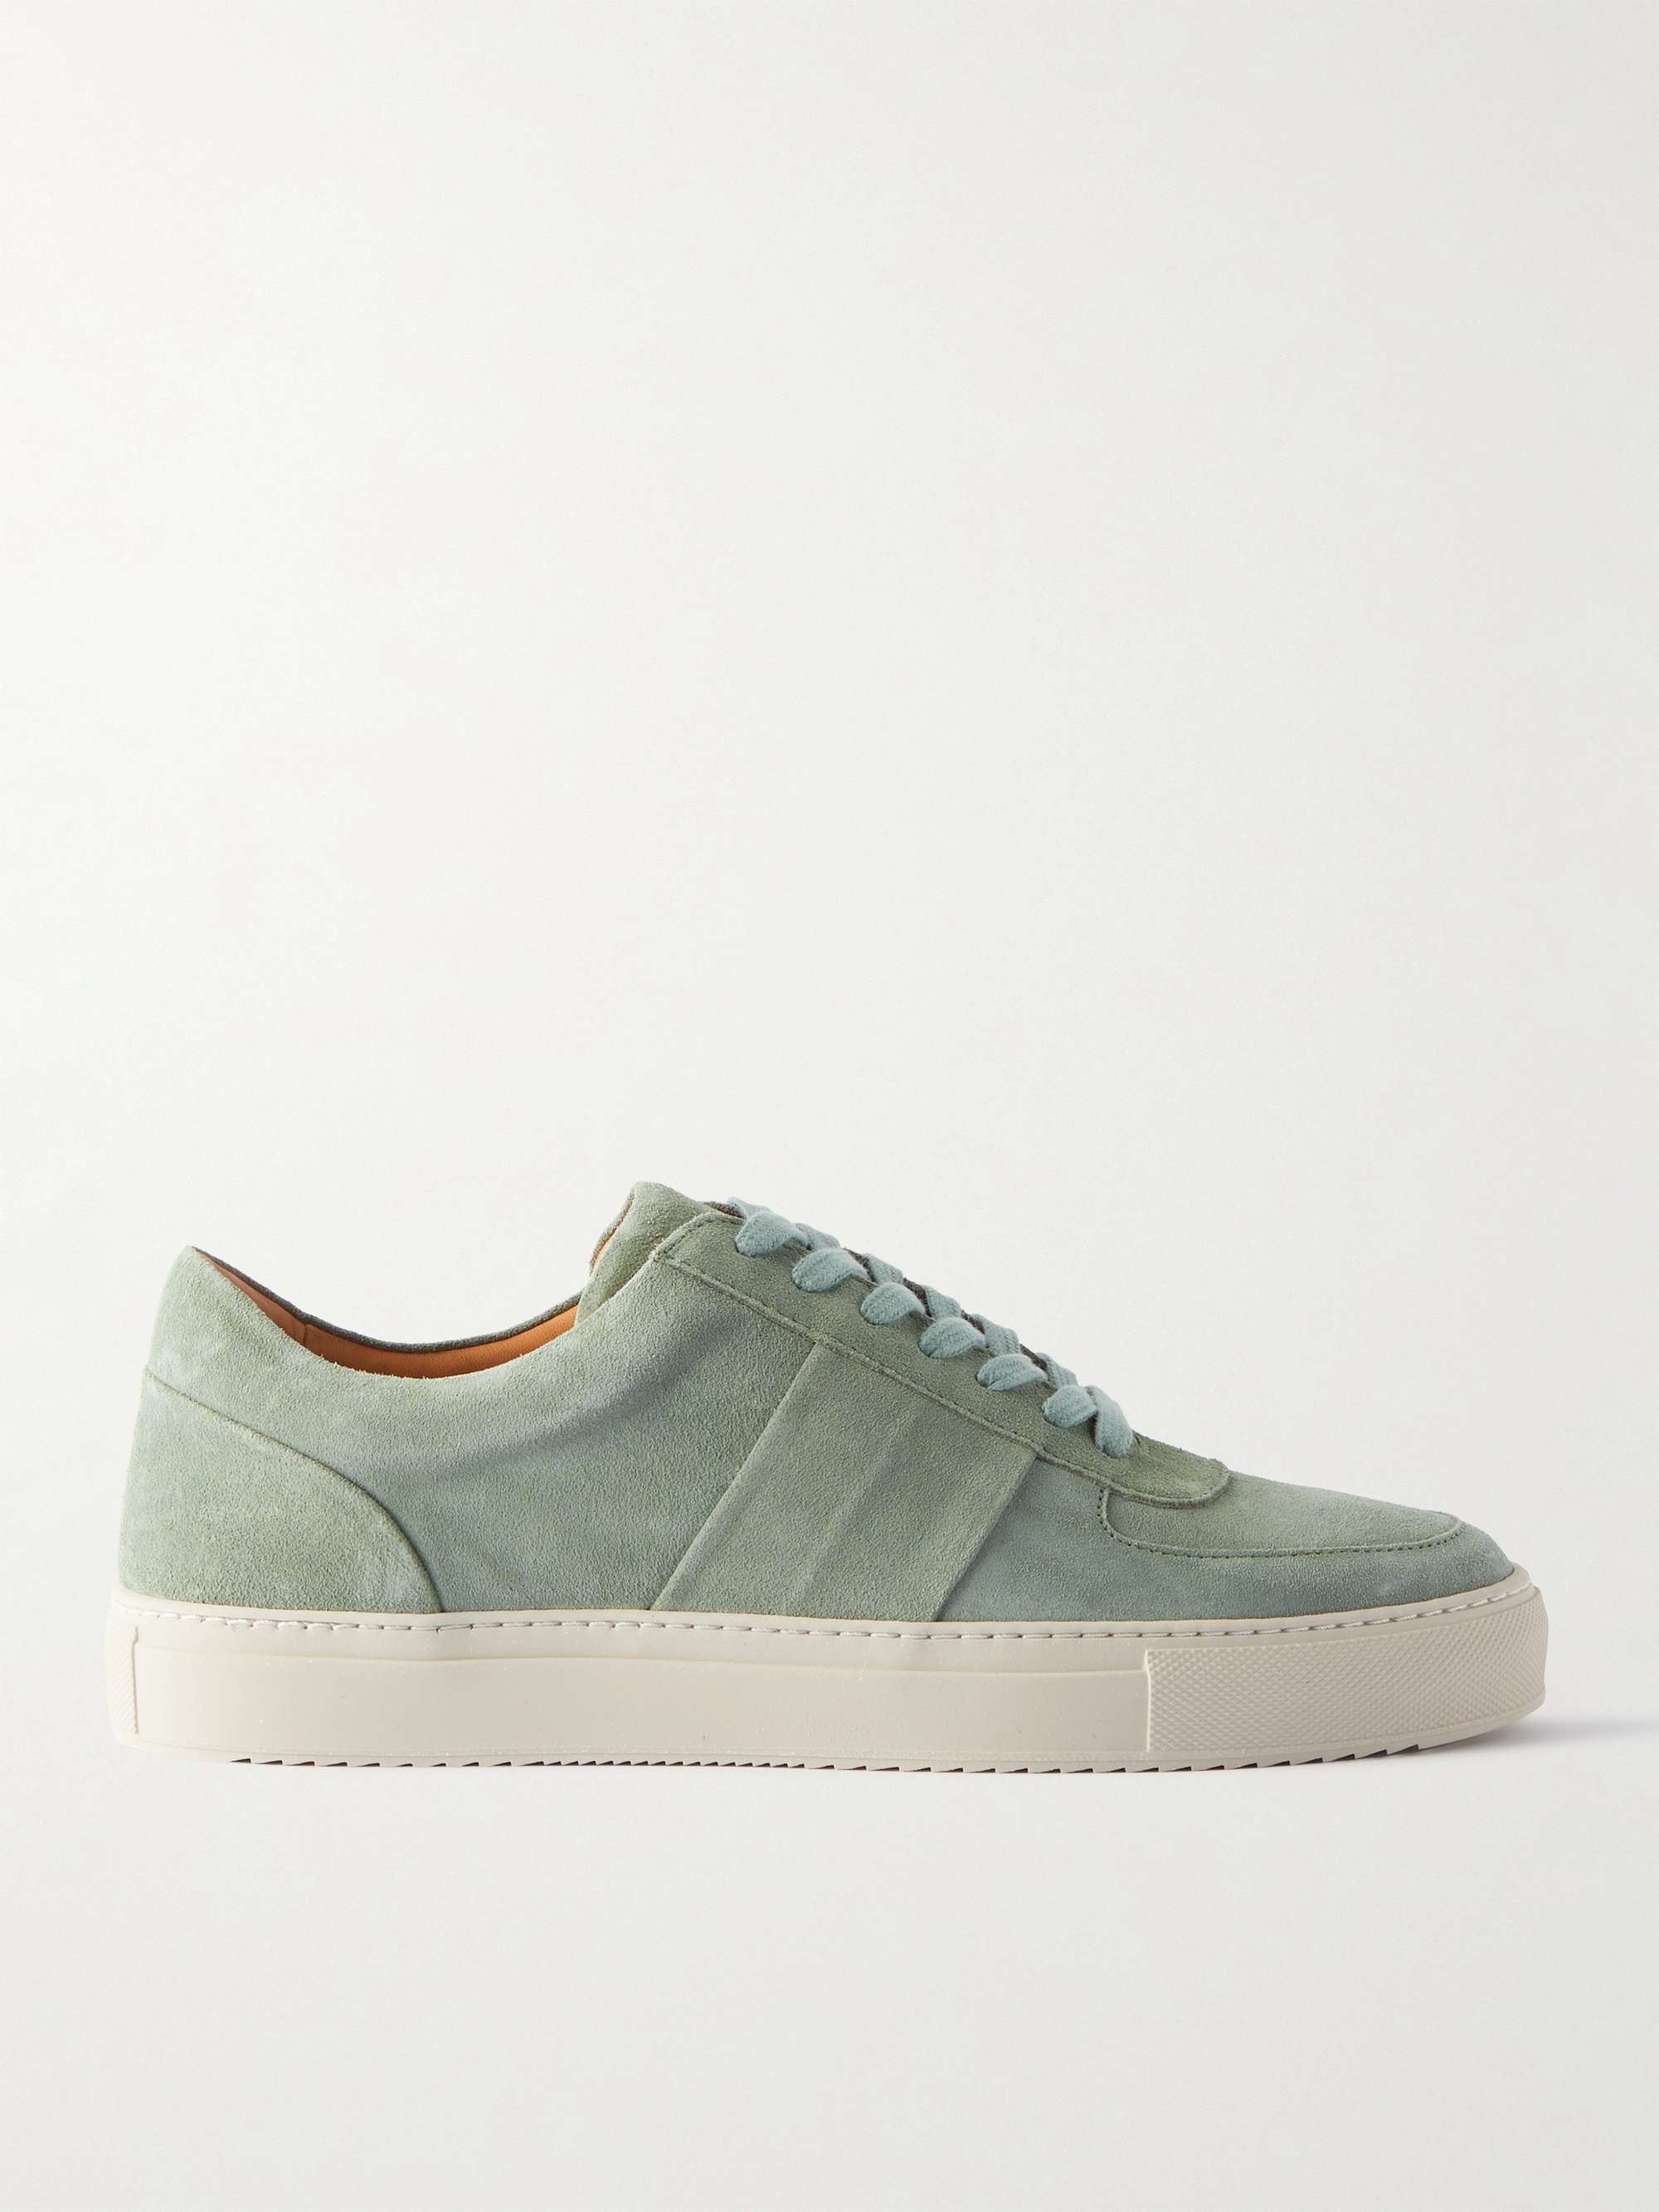 MR P. Larry Regenerated Suede by evolo® Sneakers